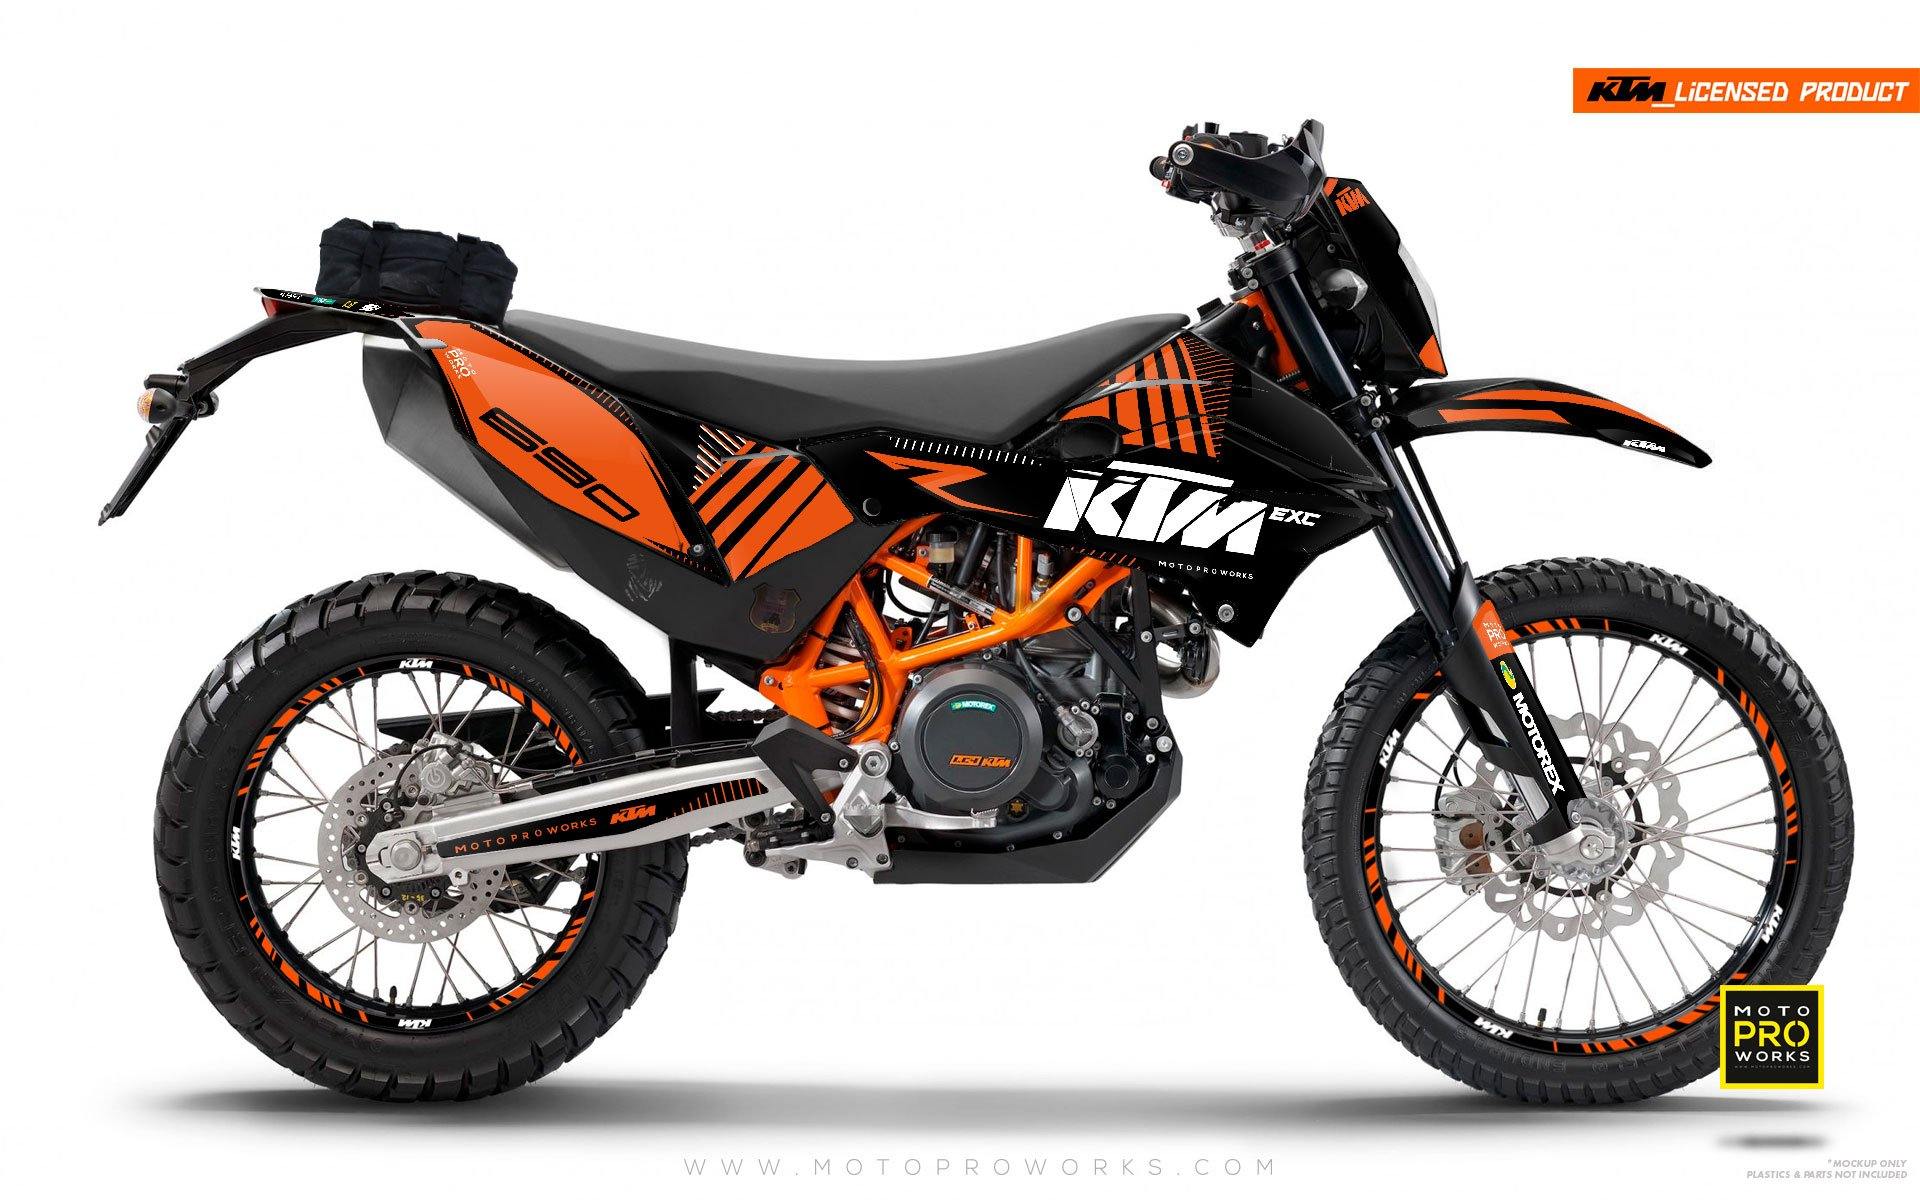 KTM GRAPHIC KIT - "VIBE" (blacksolid) - MotoProWorks | Decals and Bike Graphic kit